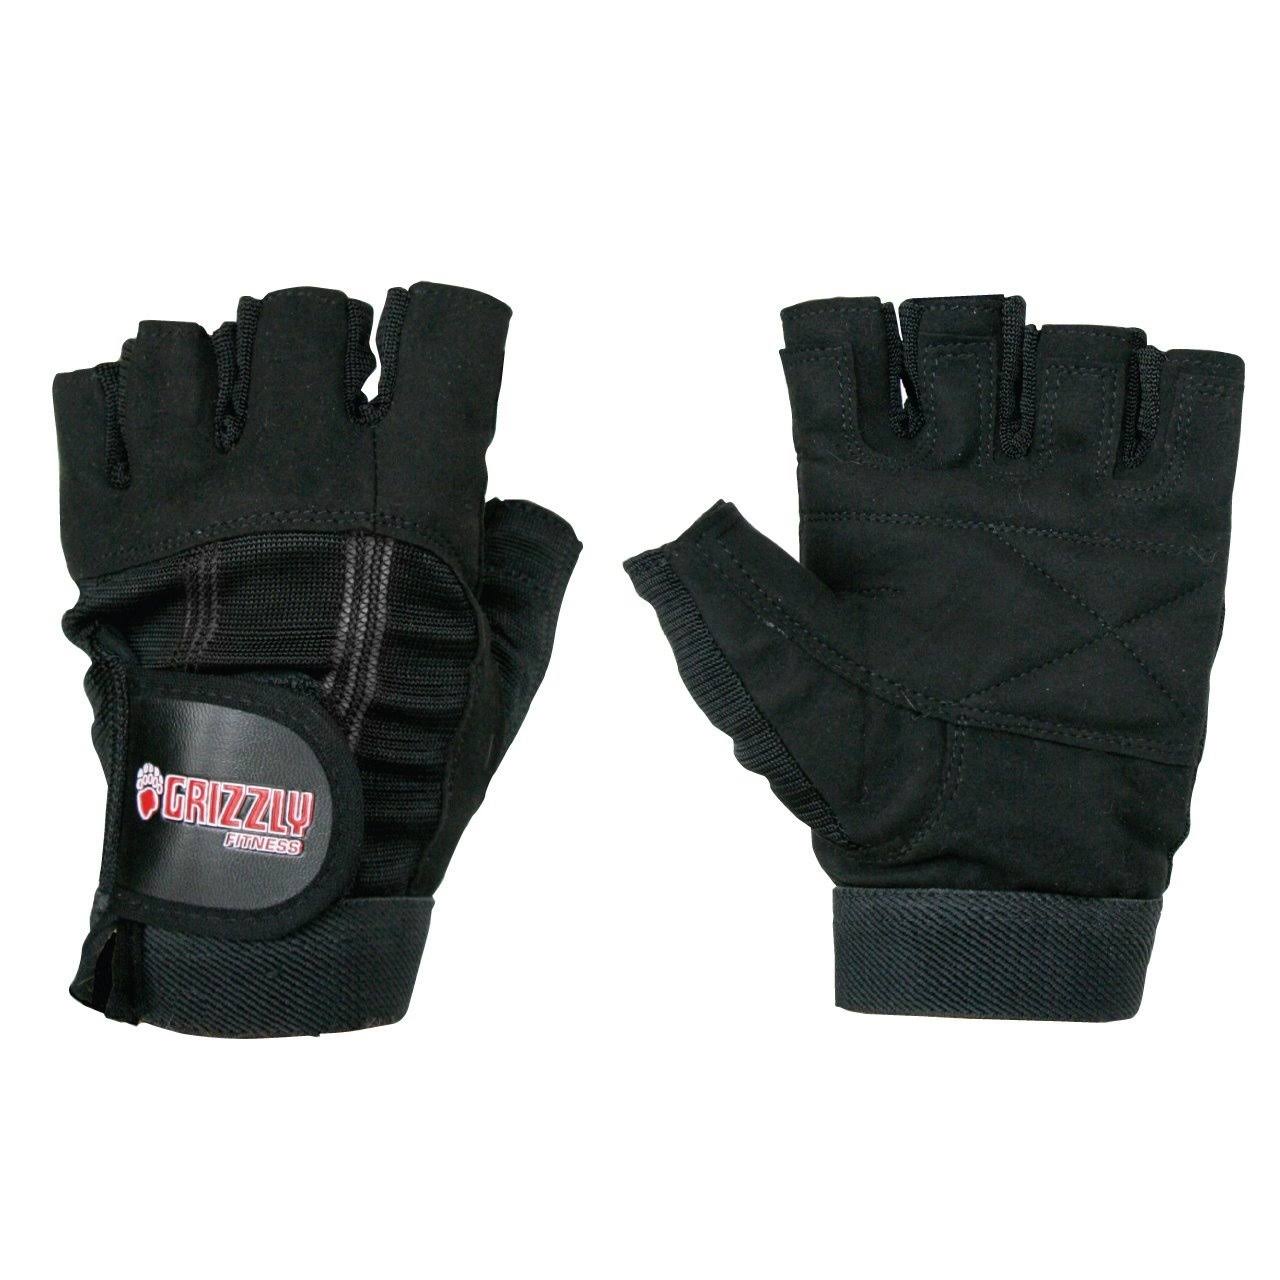 Grizzly Sport and Fitness Mens Gloves - Small, Washable